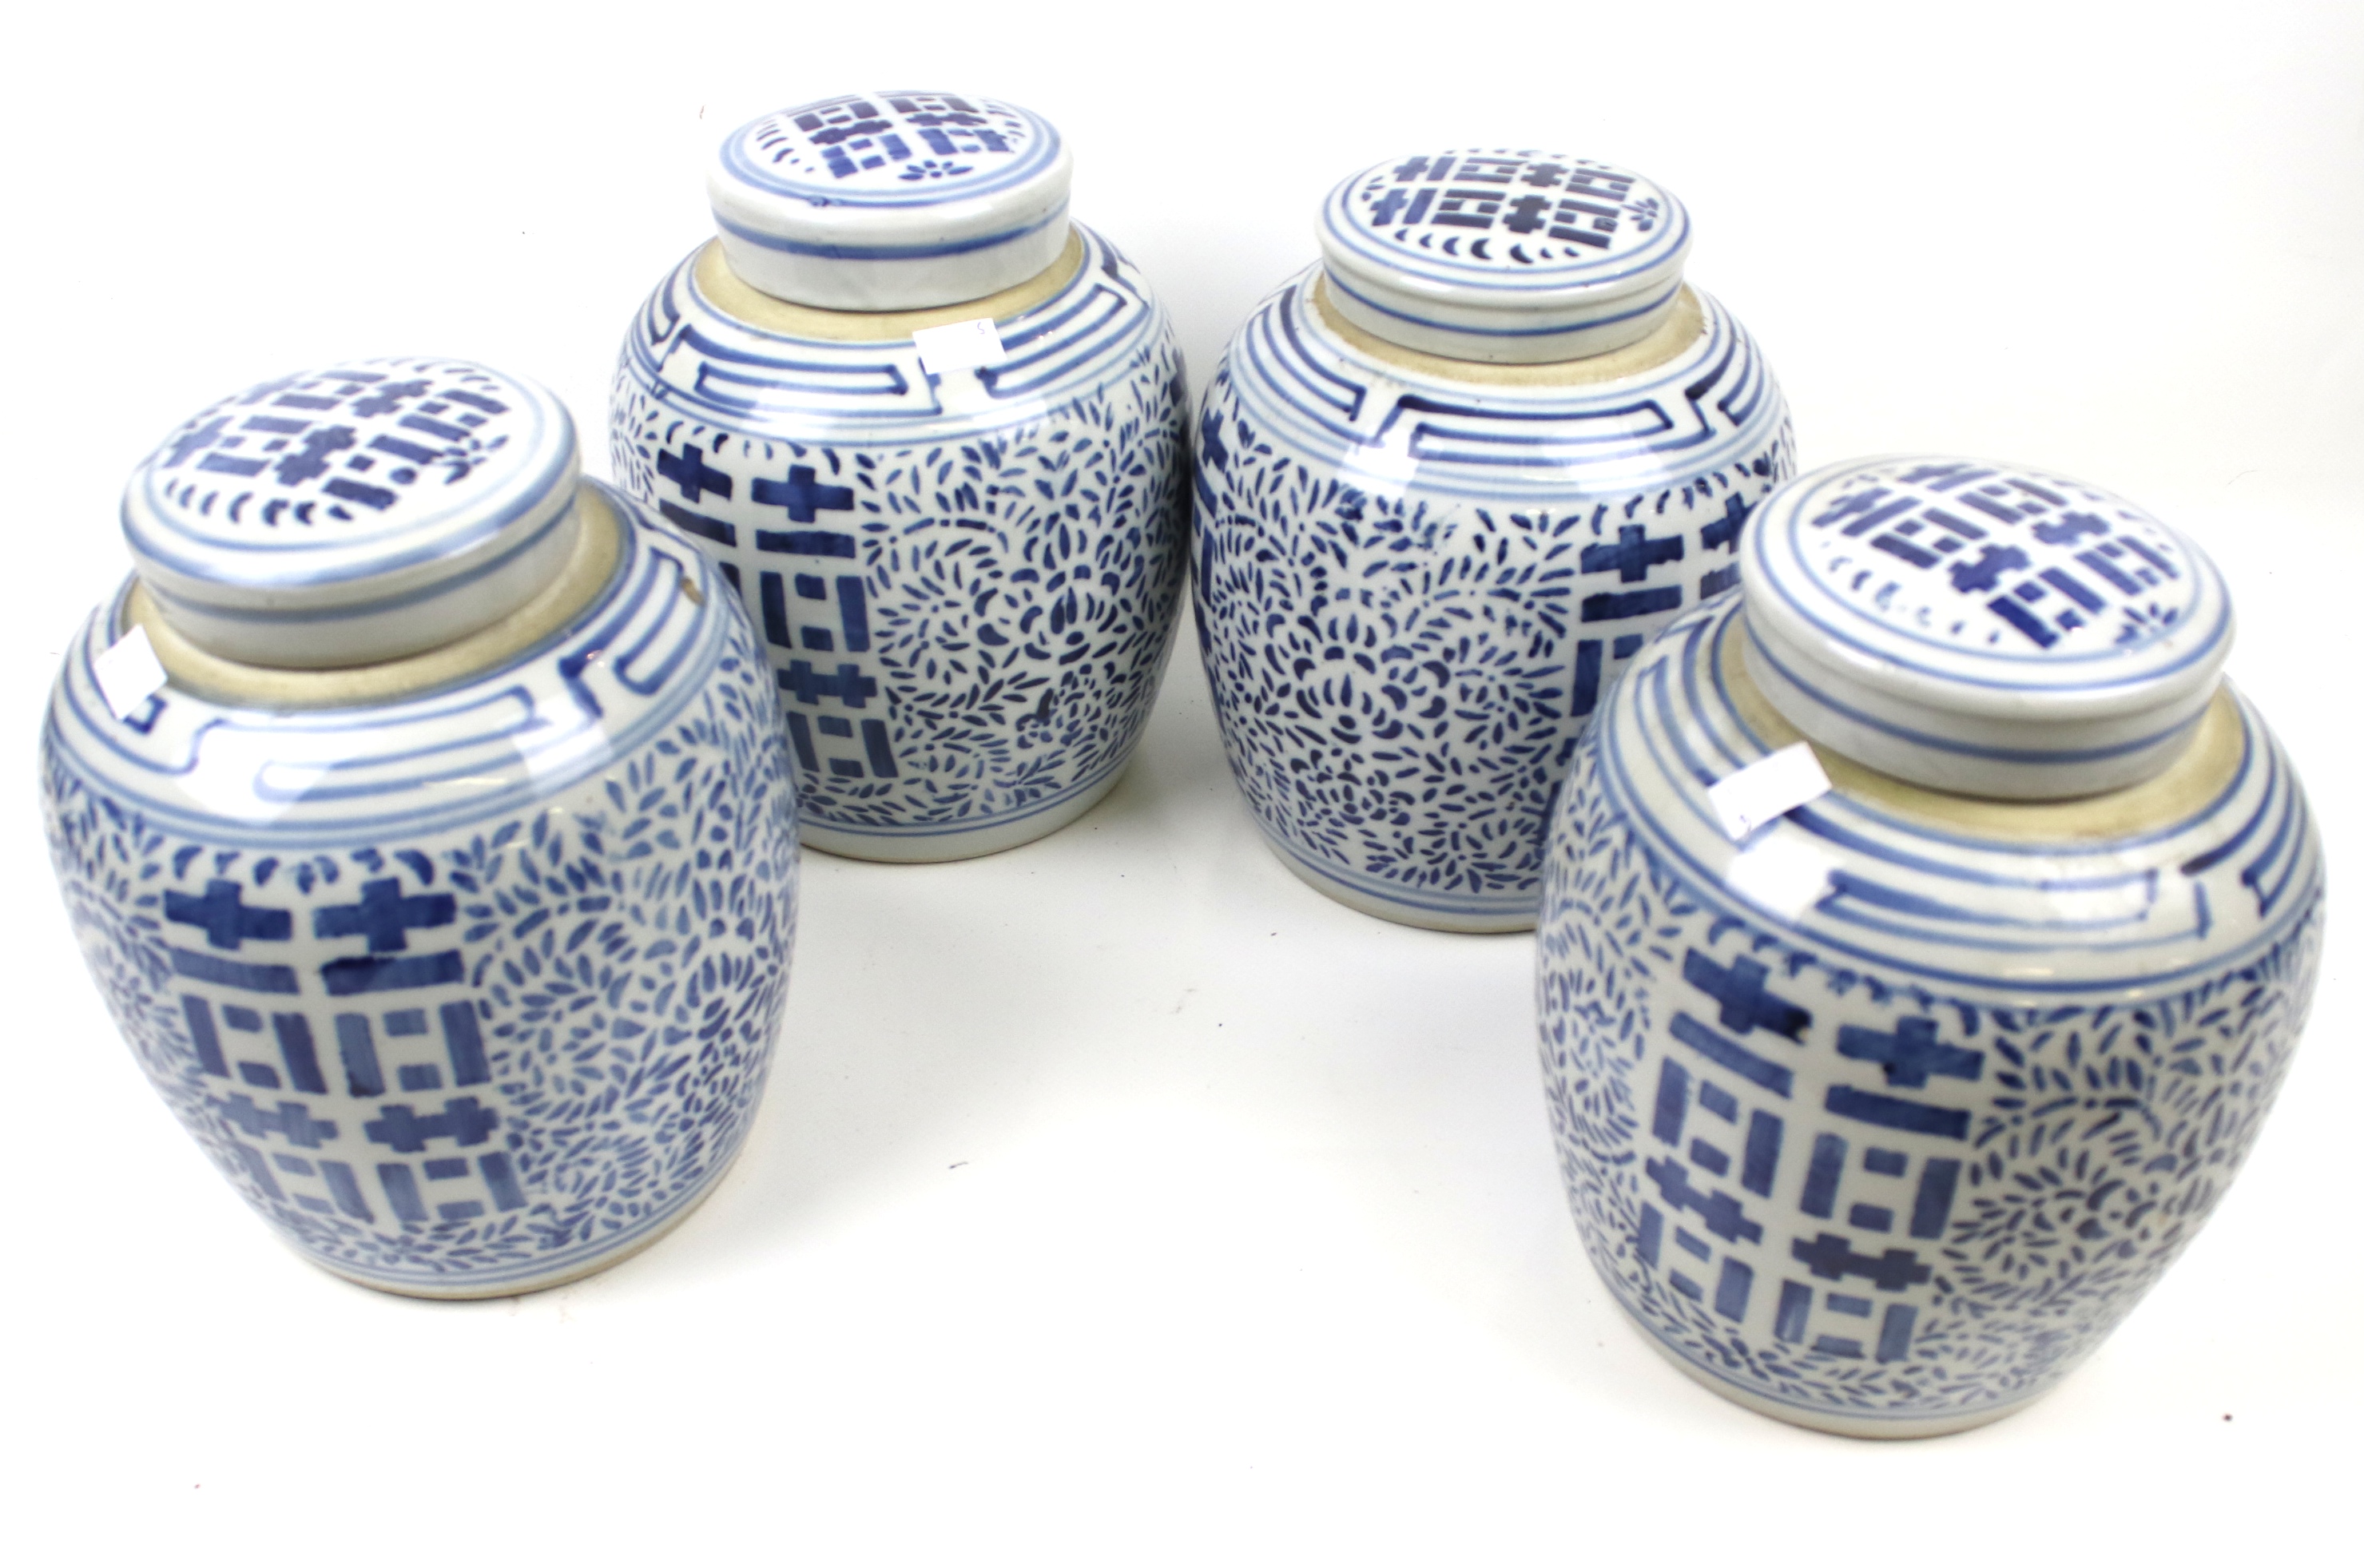 Four contemporary Chinese ceramic ginger jars and covers.